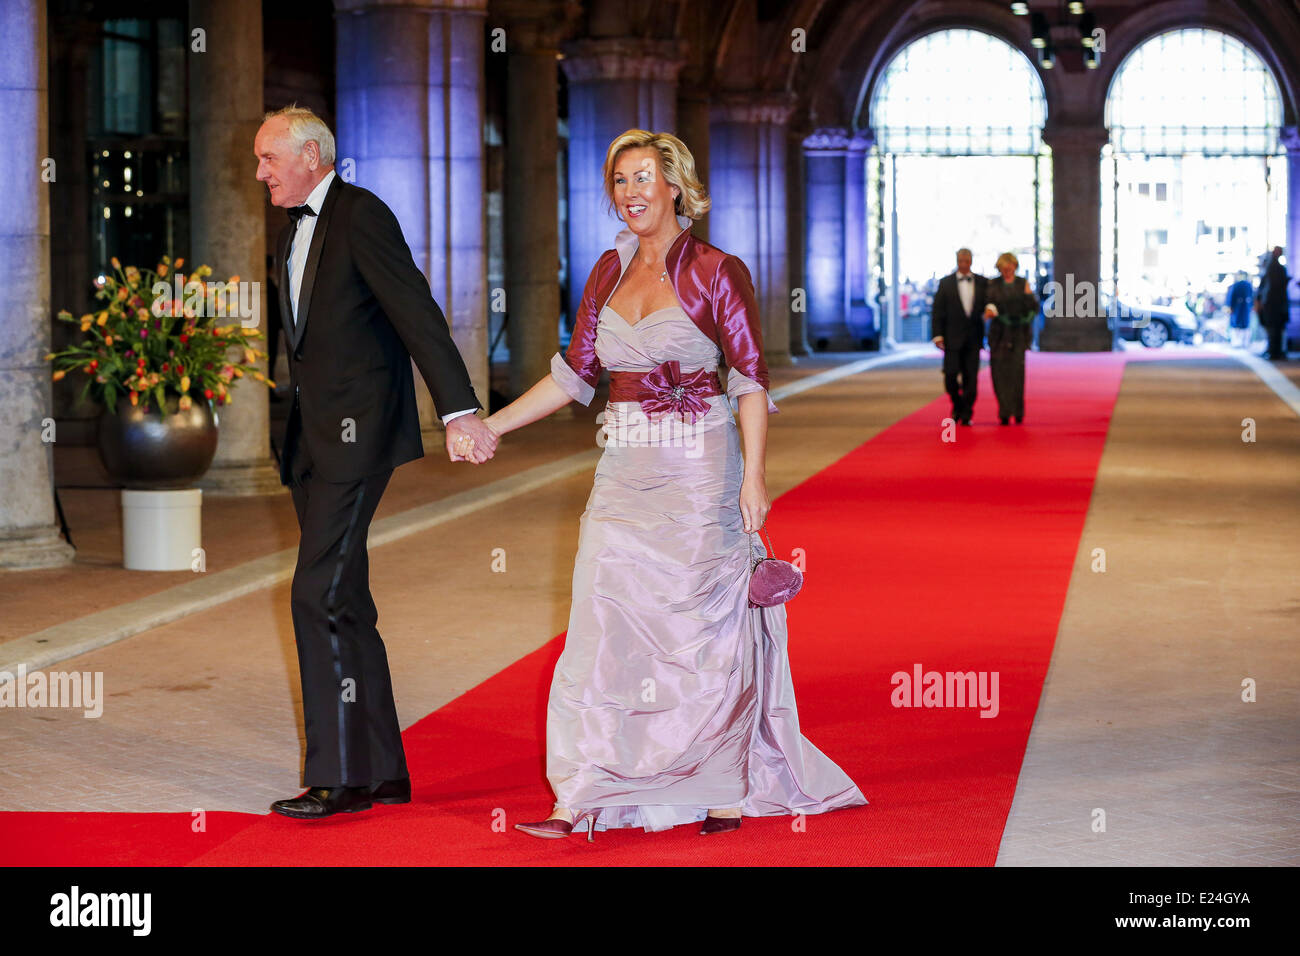 Johan Remkes and wife Nicolette Pinkster at a Gala dinner ahead of abdication of Queen Beatrix of The Netherlands. Amsterdam, Netherlands - 29.04.2013  Where: Amsterdam, The Netherlands When: 29 Apr 2013 Stock Photo